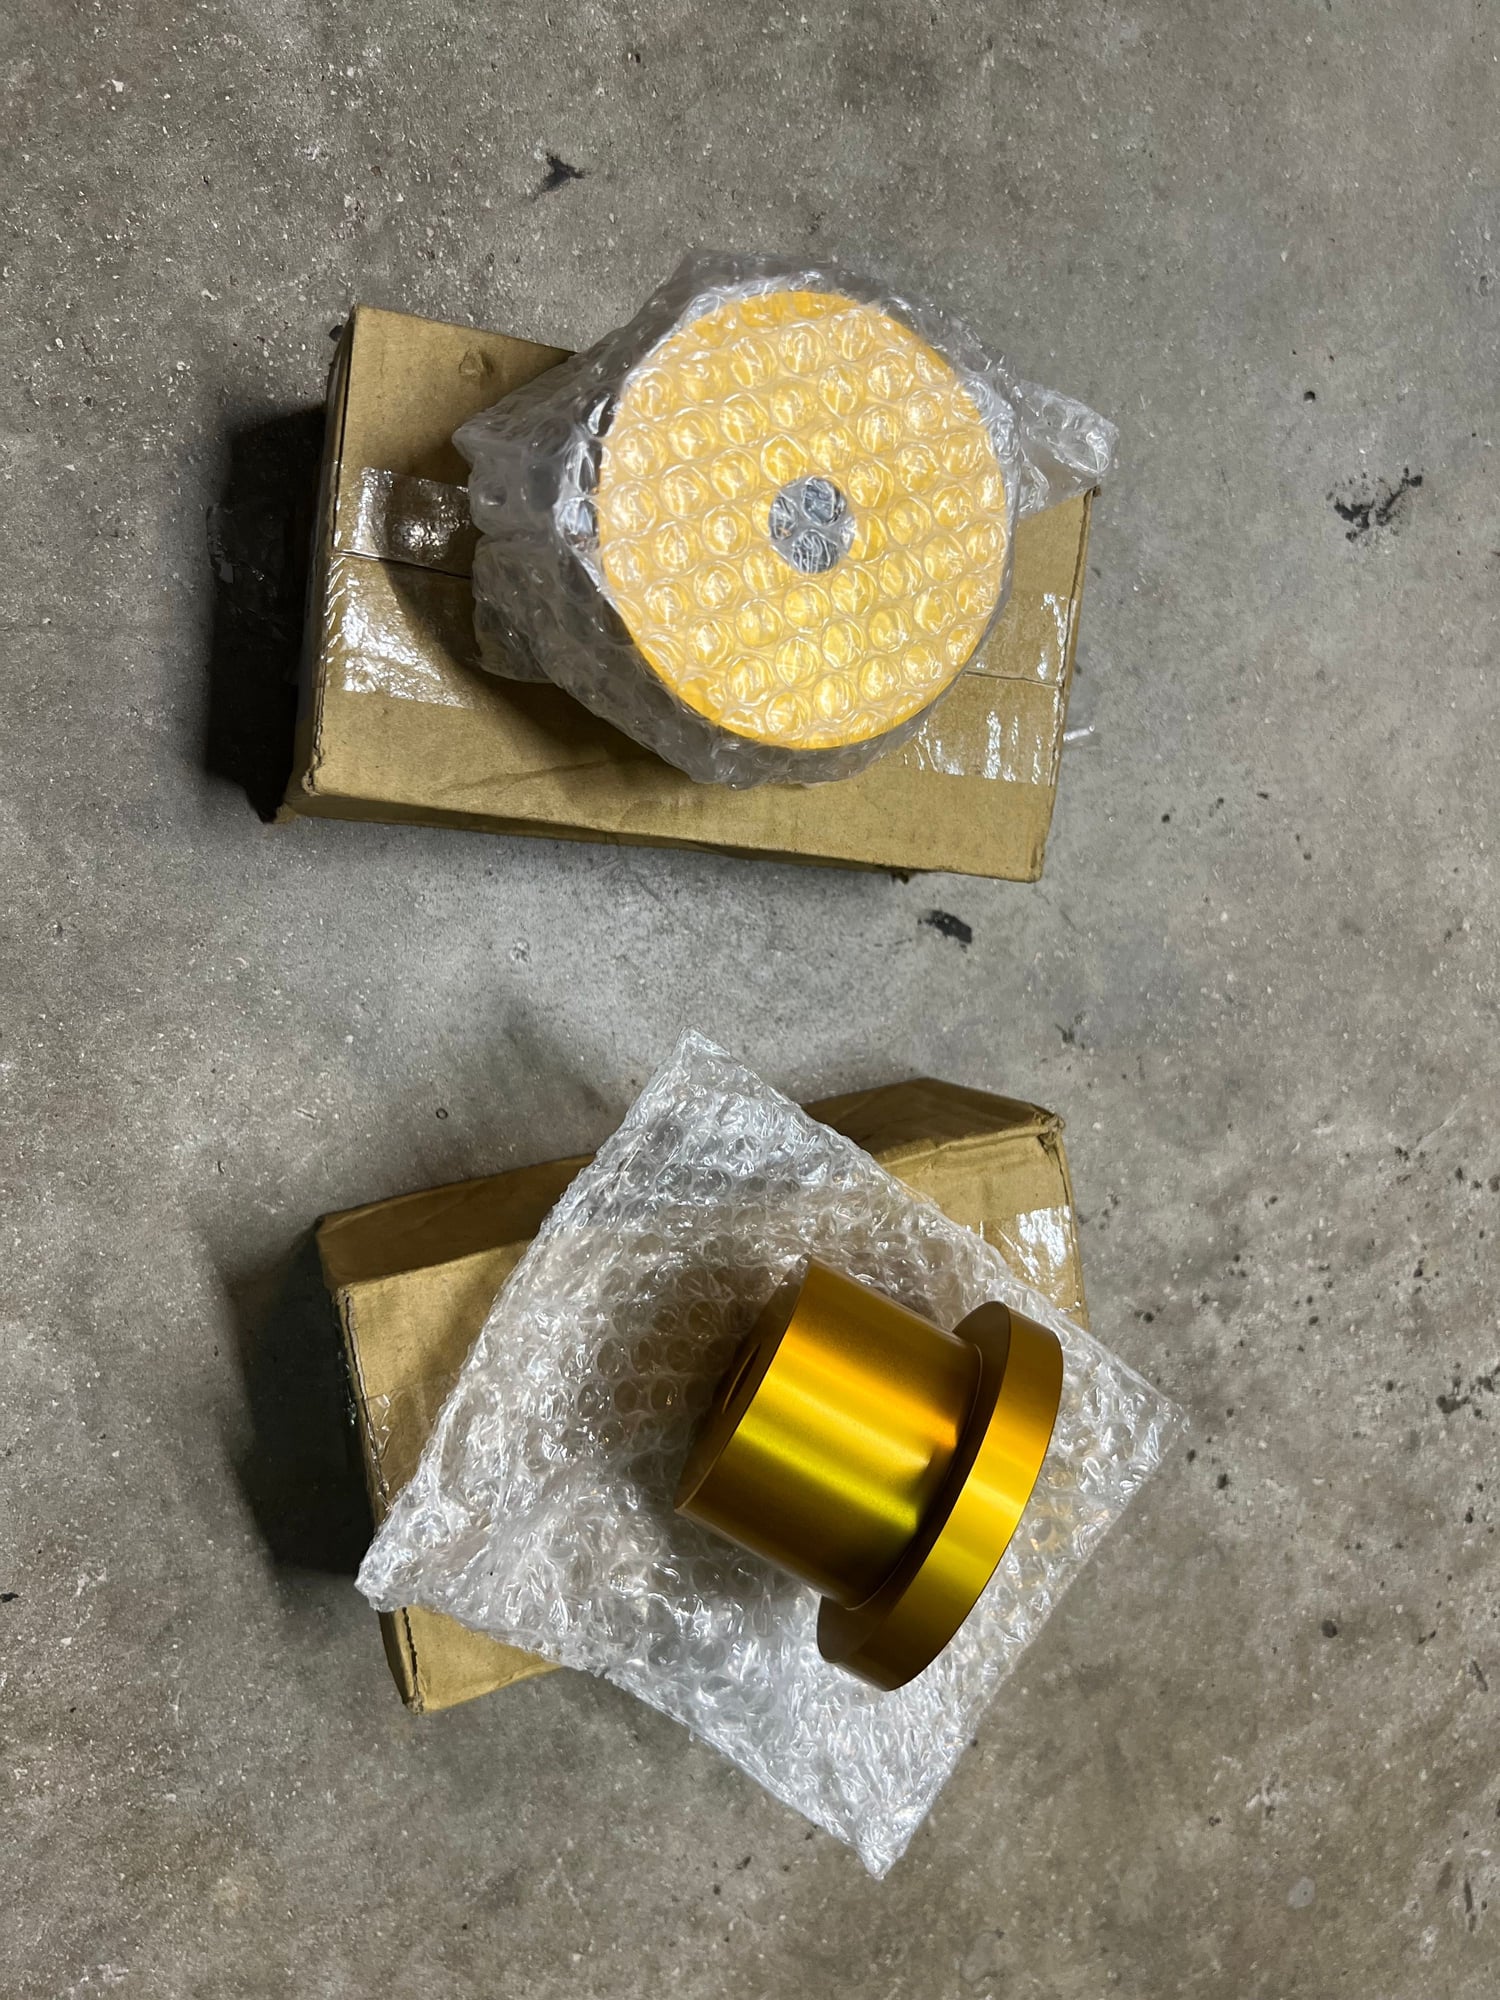 Drivetrain - For sale - FC Rx7 solid differential mounts - New - 0  All Models - Deerfield Beach, FL 33442, United States